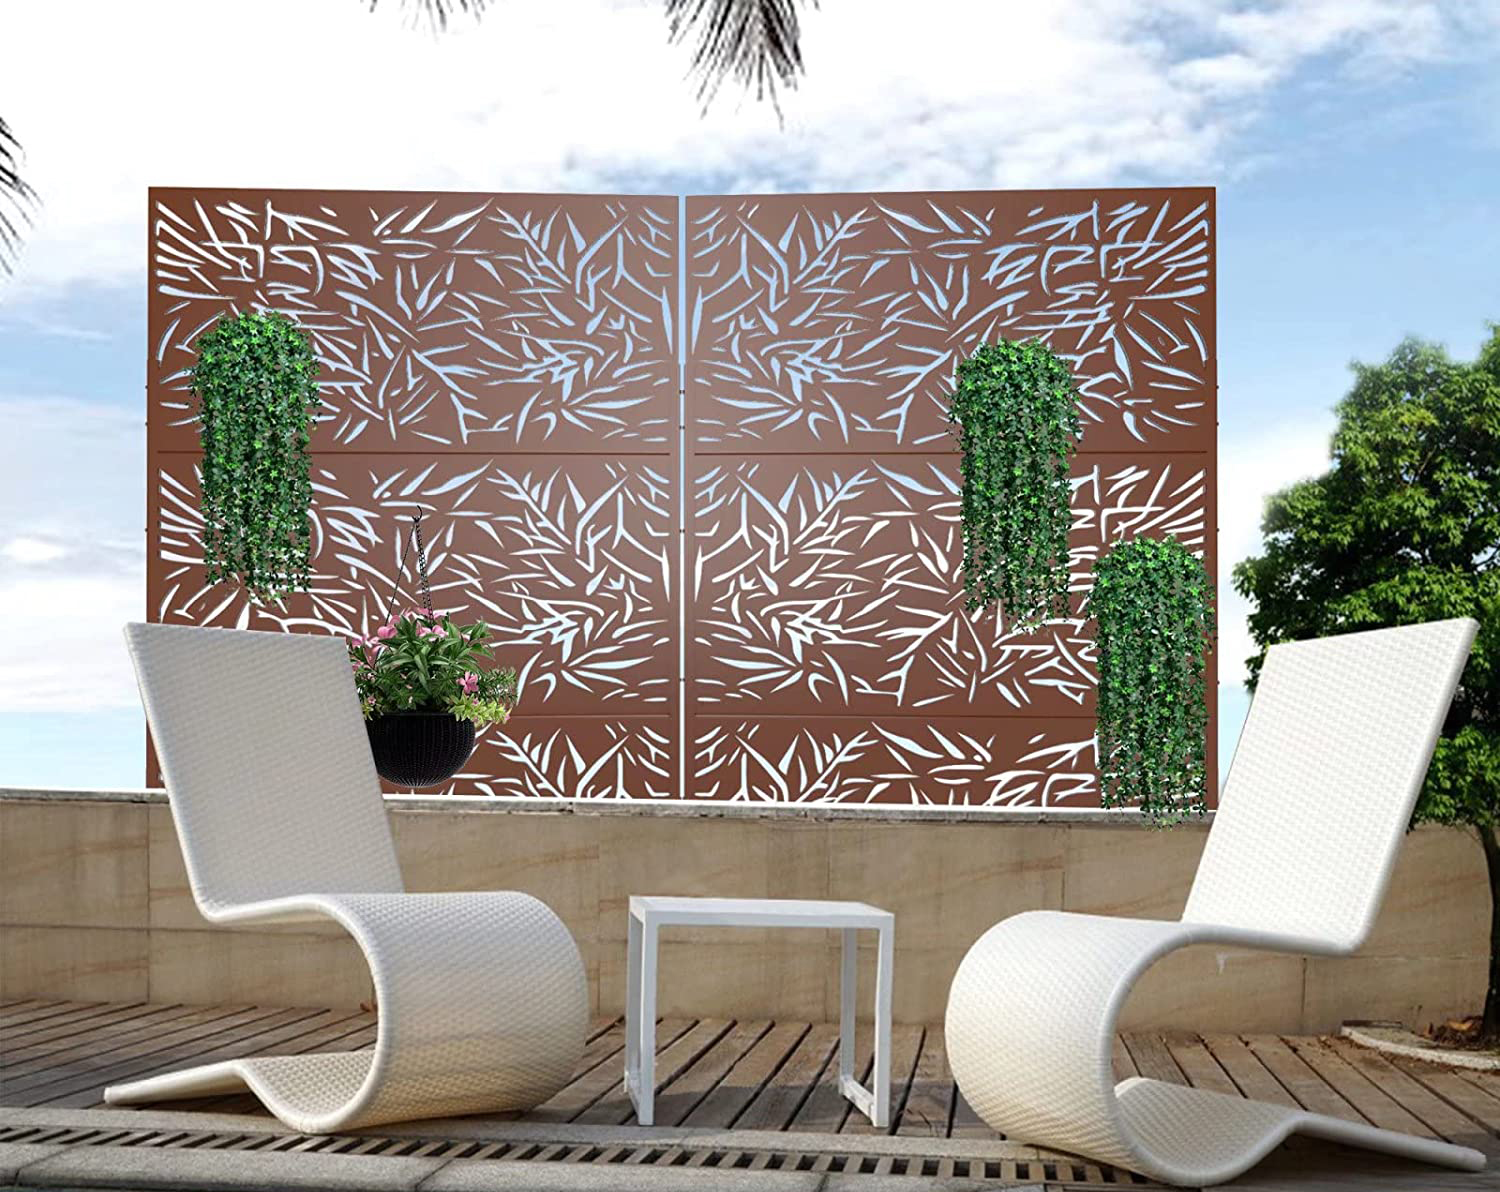 Six Characteristics of Outdoor Privacy Screen Make Your Space More Beautiful!